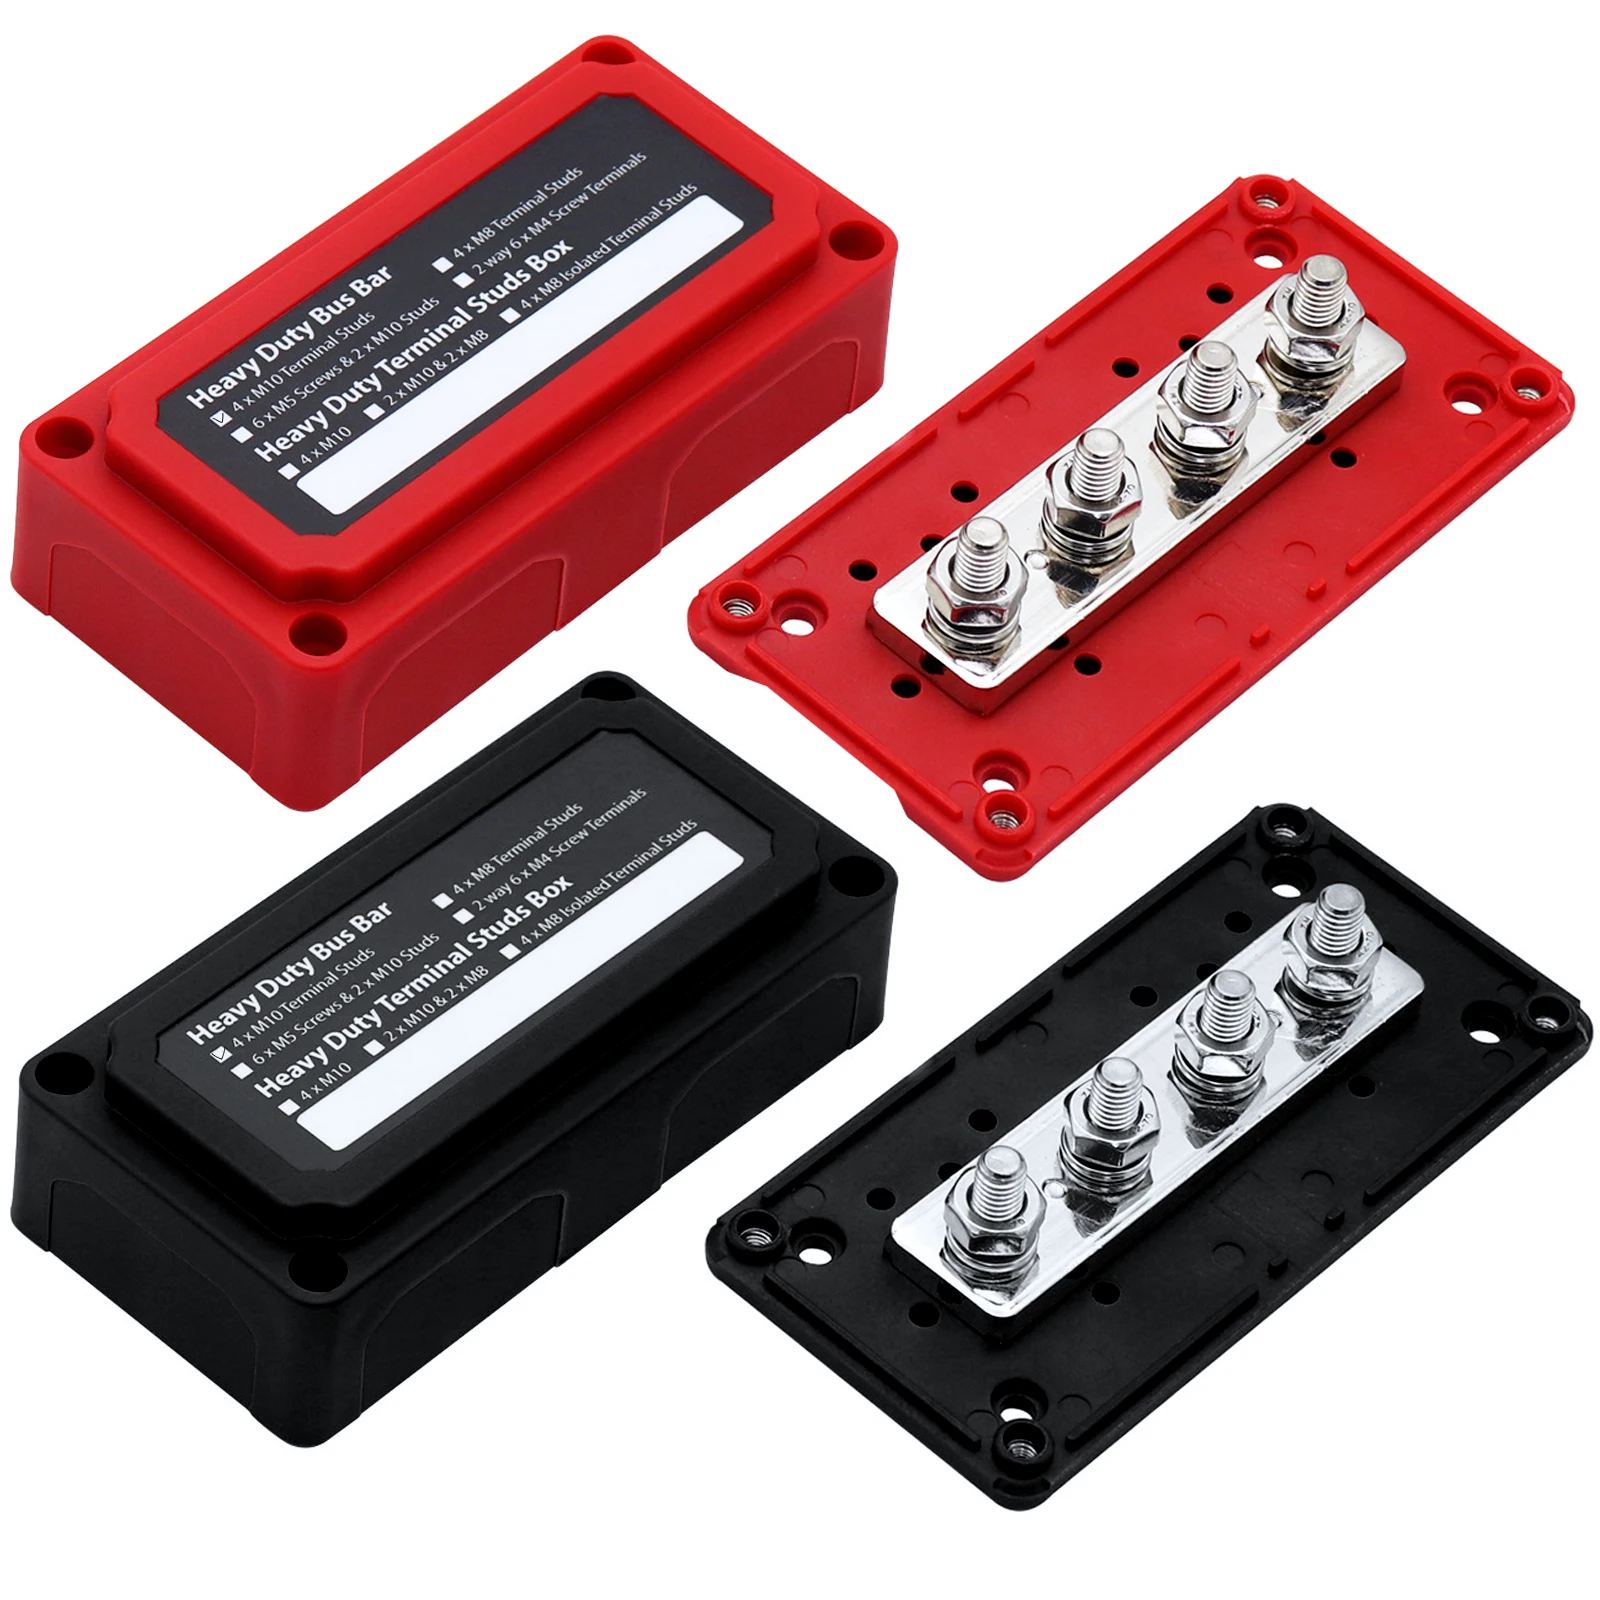  Heavy Duty Bus Bar Box M8 300A with 4 Terminal Studs Power  Distribution Box Block Boating Fishing Battery Switches Busbars 12v-24v Max  48V (Red) : Automotive